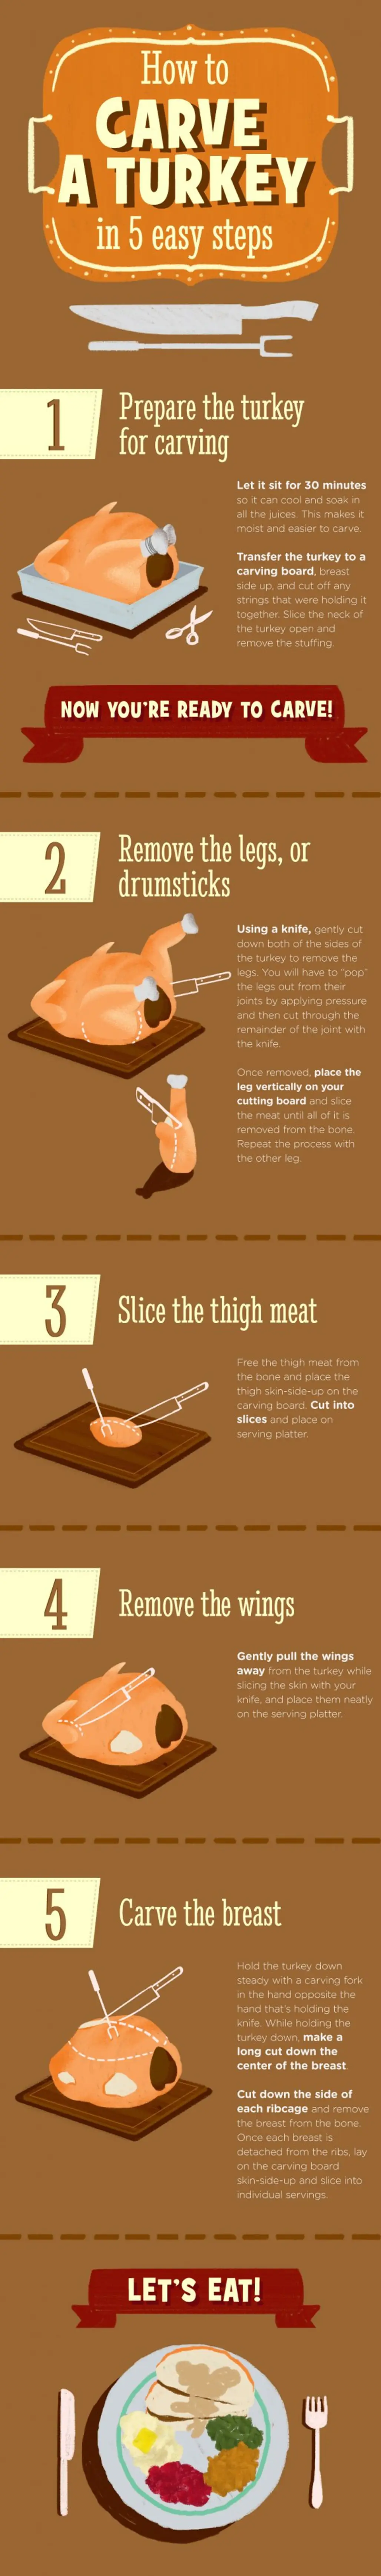 How to Carve Your Thanksgiving Turkey in 5 Easy Steps